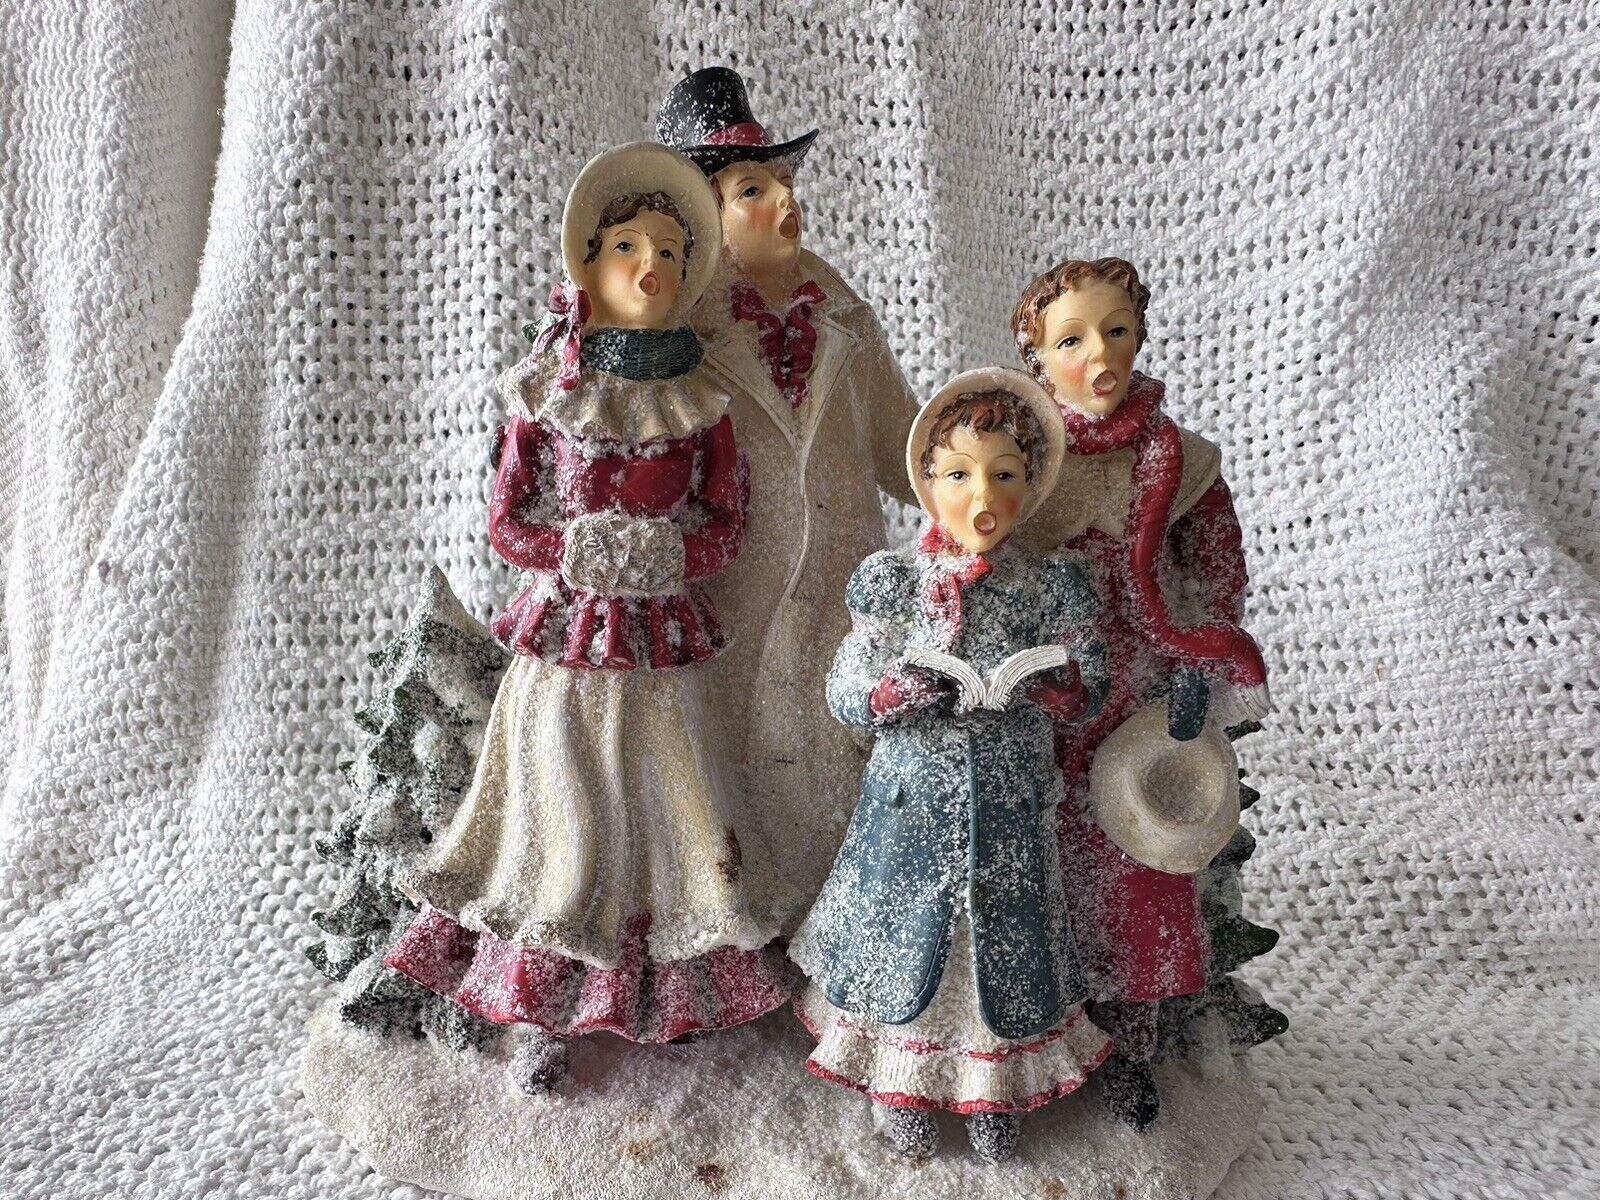 Vtg Tii Collections Victorian Christmas Carolers Glitter Painted Faces Resin 8